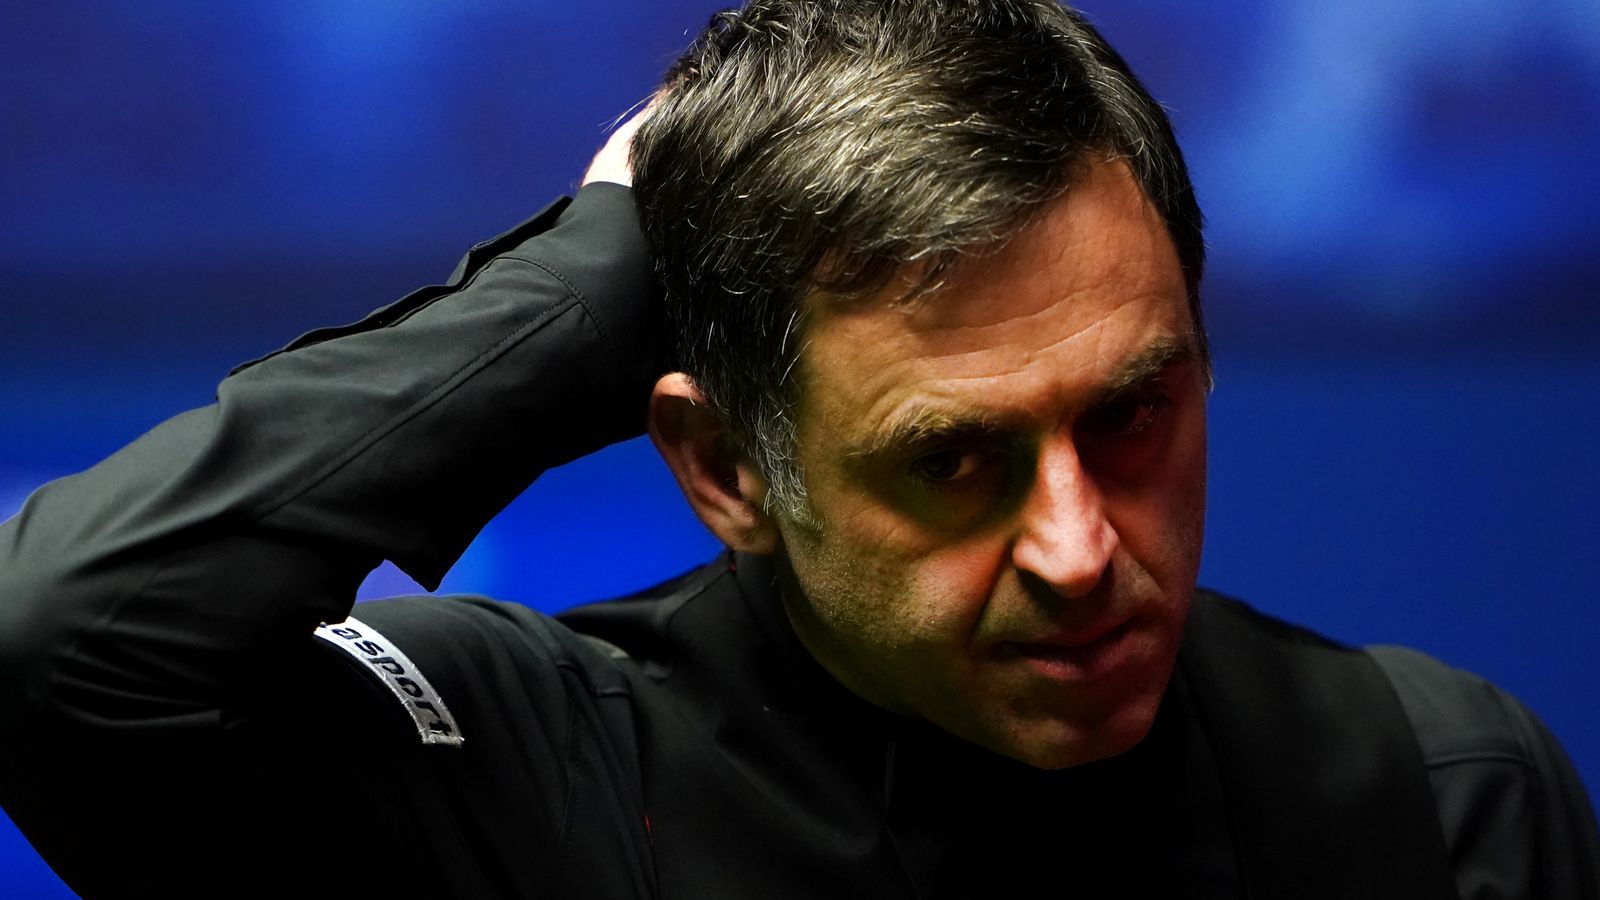 Ronnie O’Sullivan: Seven-time world champion says snooker ‘ain’t worth the stress and the hassle’